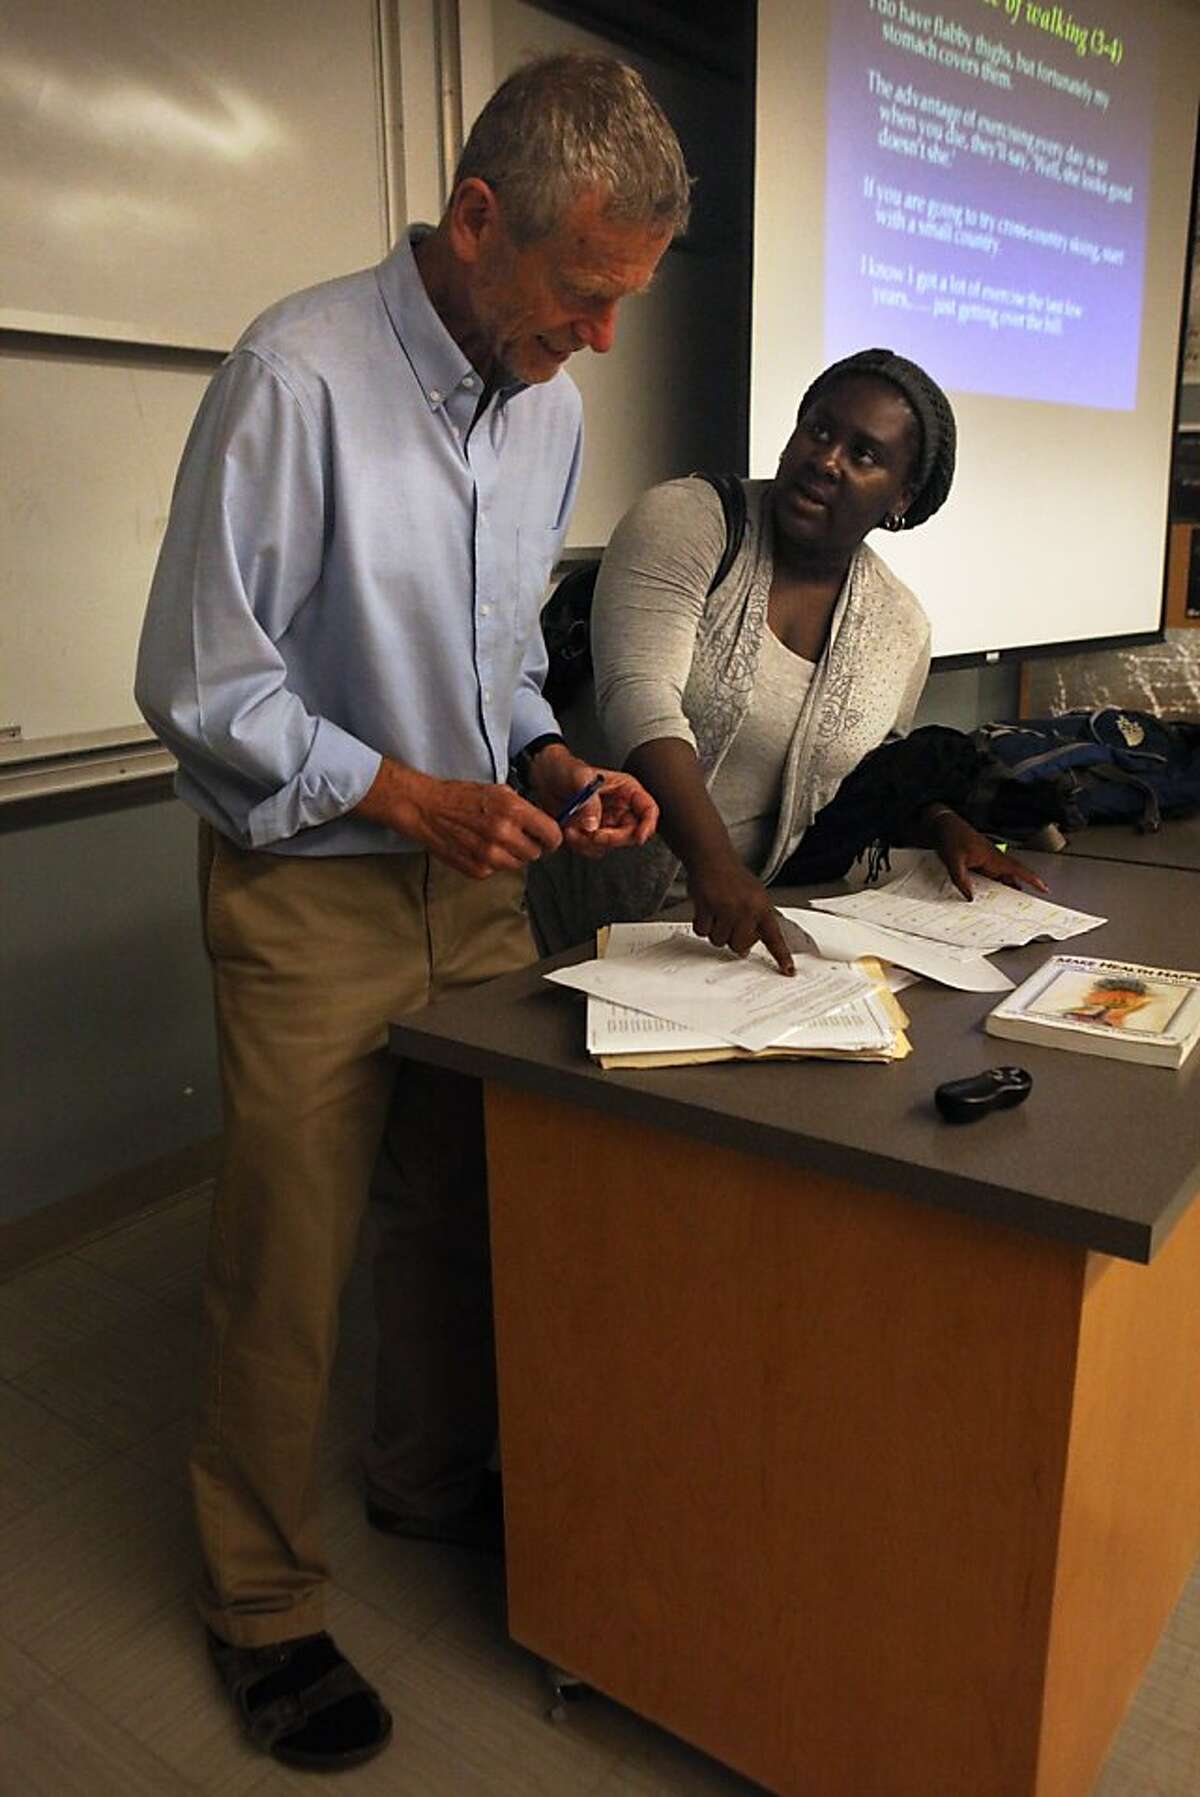 Student Chioma Ureh (right) talks with professor Erik Peper (left) after a class called Holistic Health 380: Western Perspectives at San Francisco State University in California on Monday, August 26, 2013.